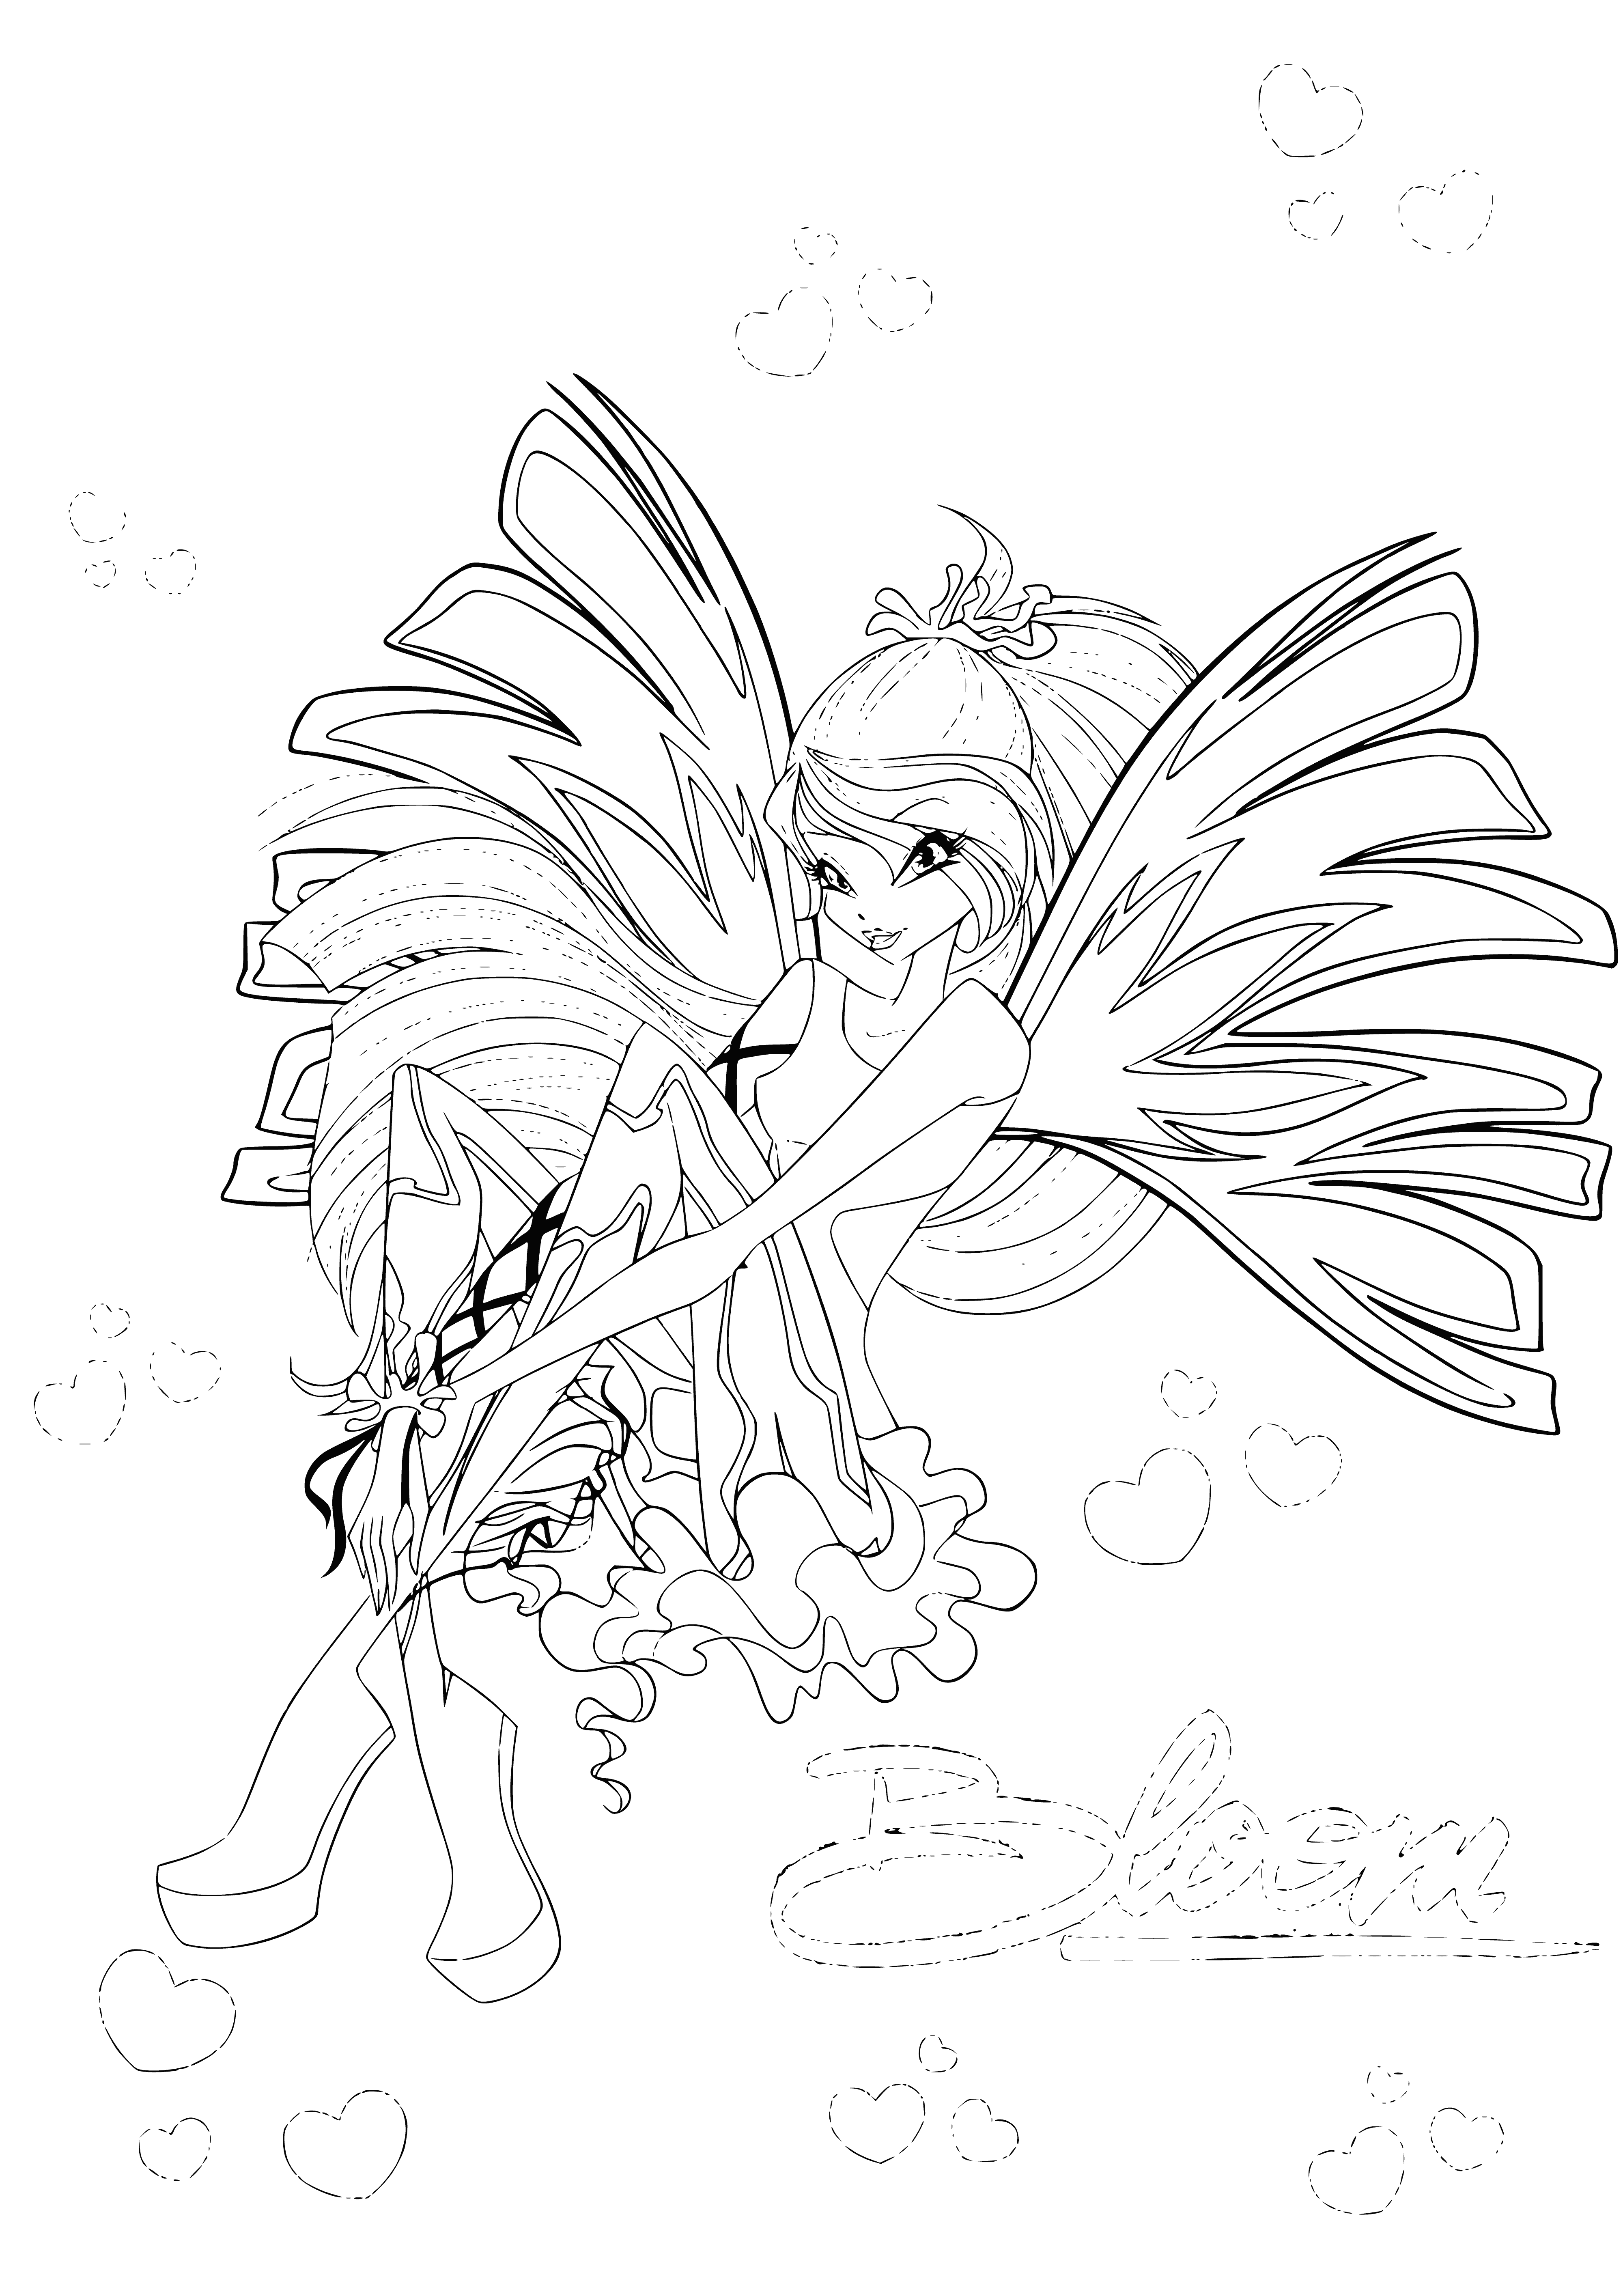 coloring page: Fairy Bloom Sirenix w/ long blonde hair, blue eyes & translucent wings. Wears blue dress w/ white underskirt. Has starfish in hair & pink/blue aura w/ sparkles around her.